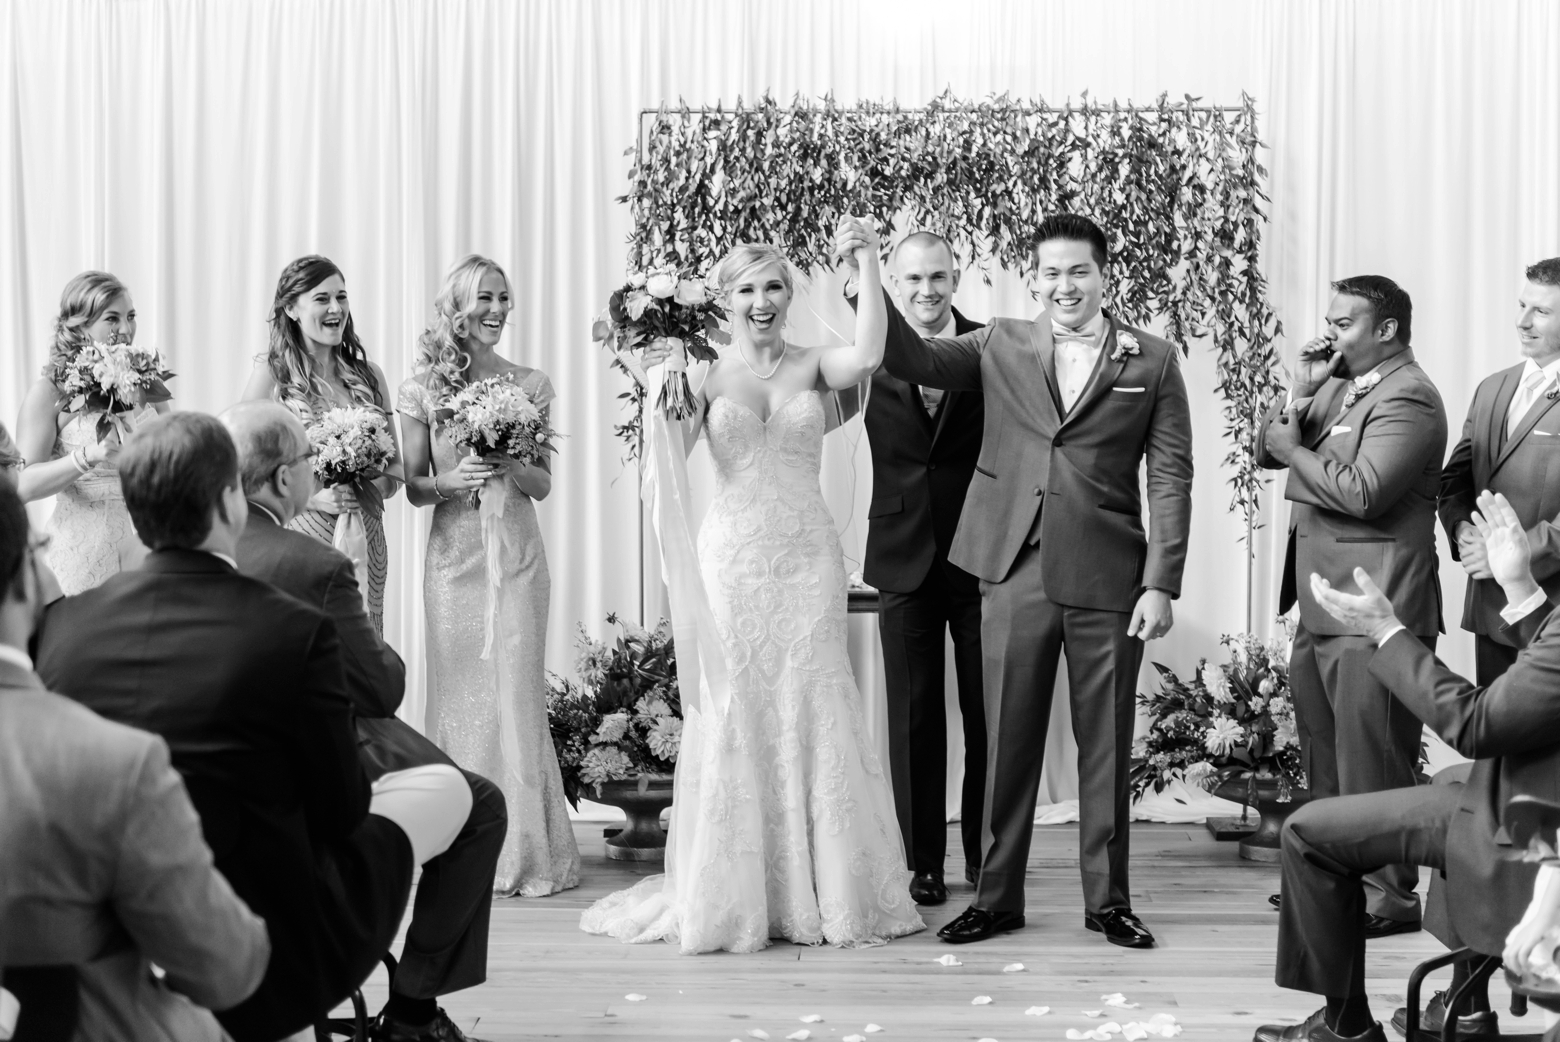 The Bride and Groom raise their arms after they say I do as their friends and family applaud